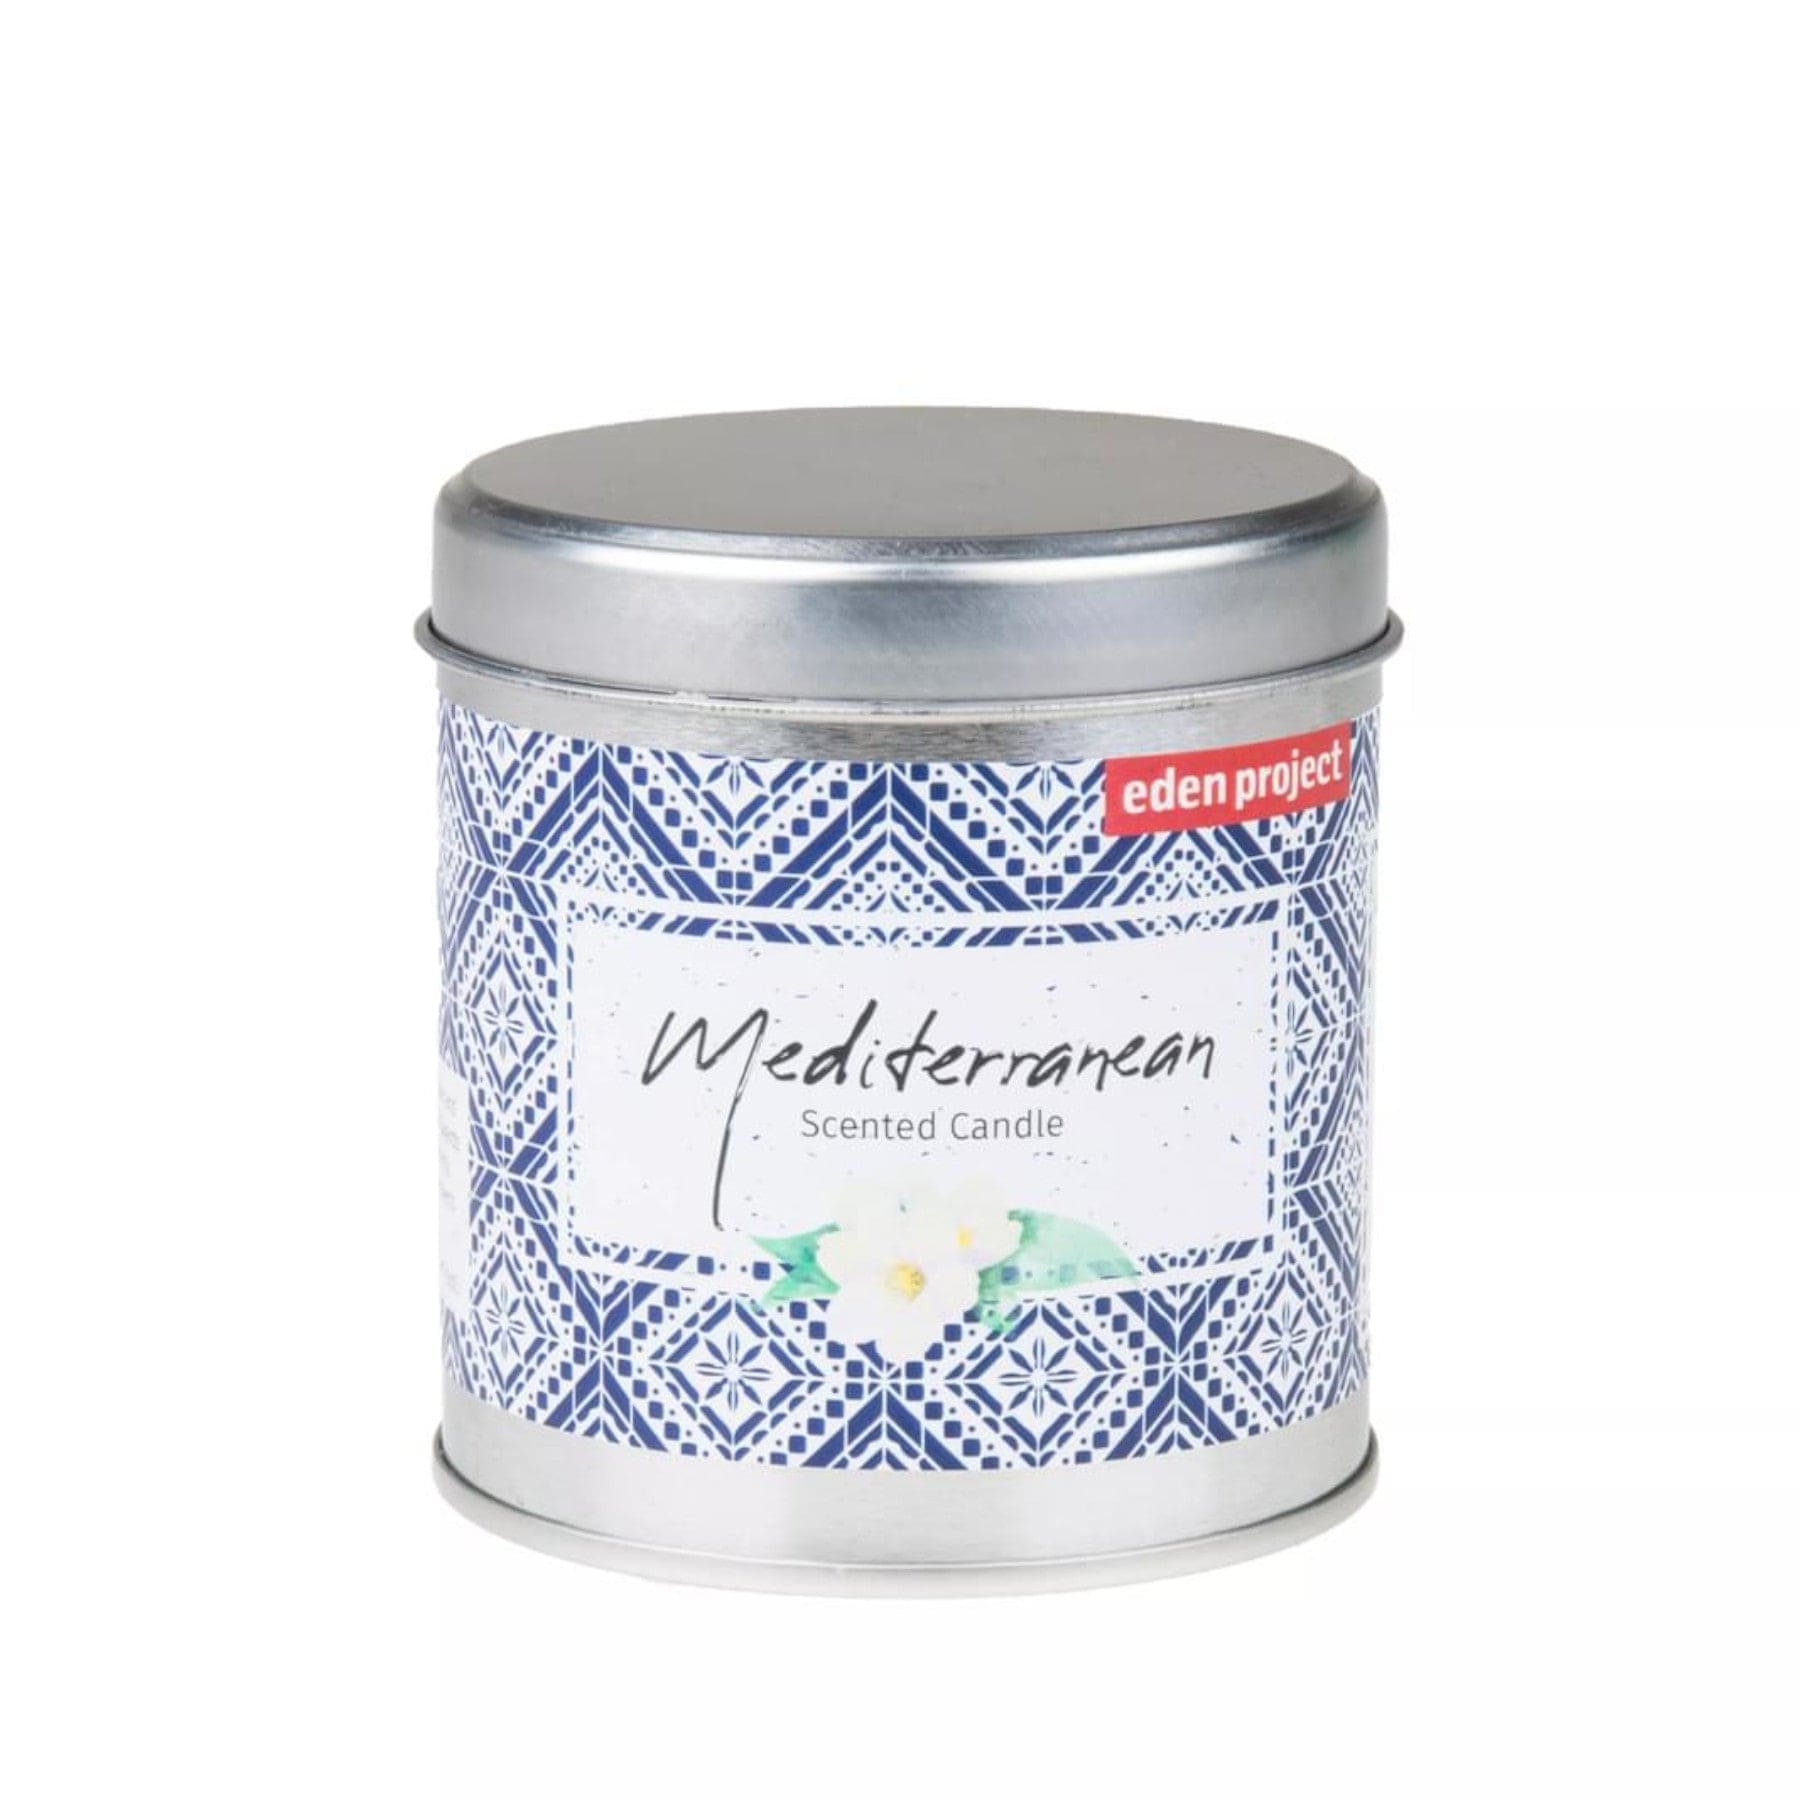 Eden Project Mediterranean scented candle in decorative tin with blue and white geometric design